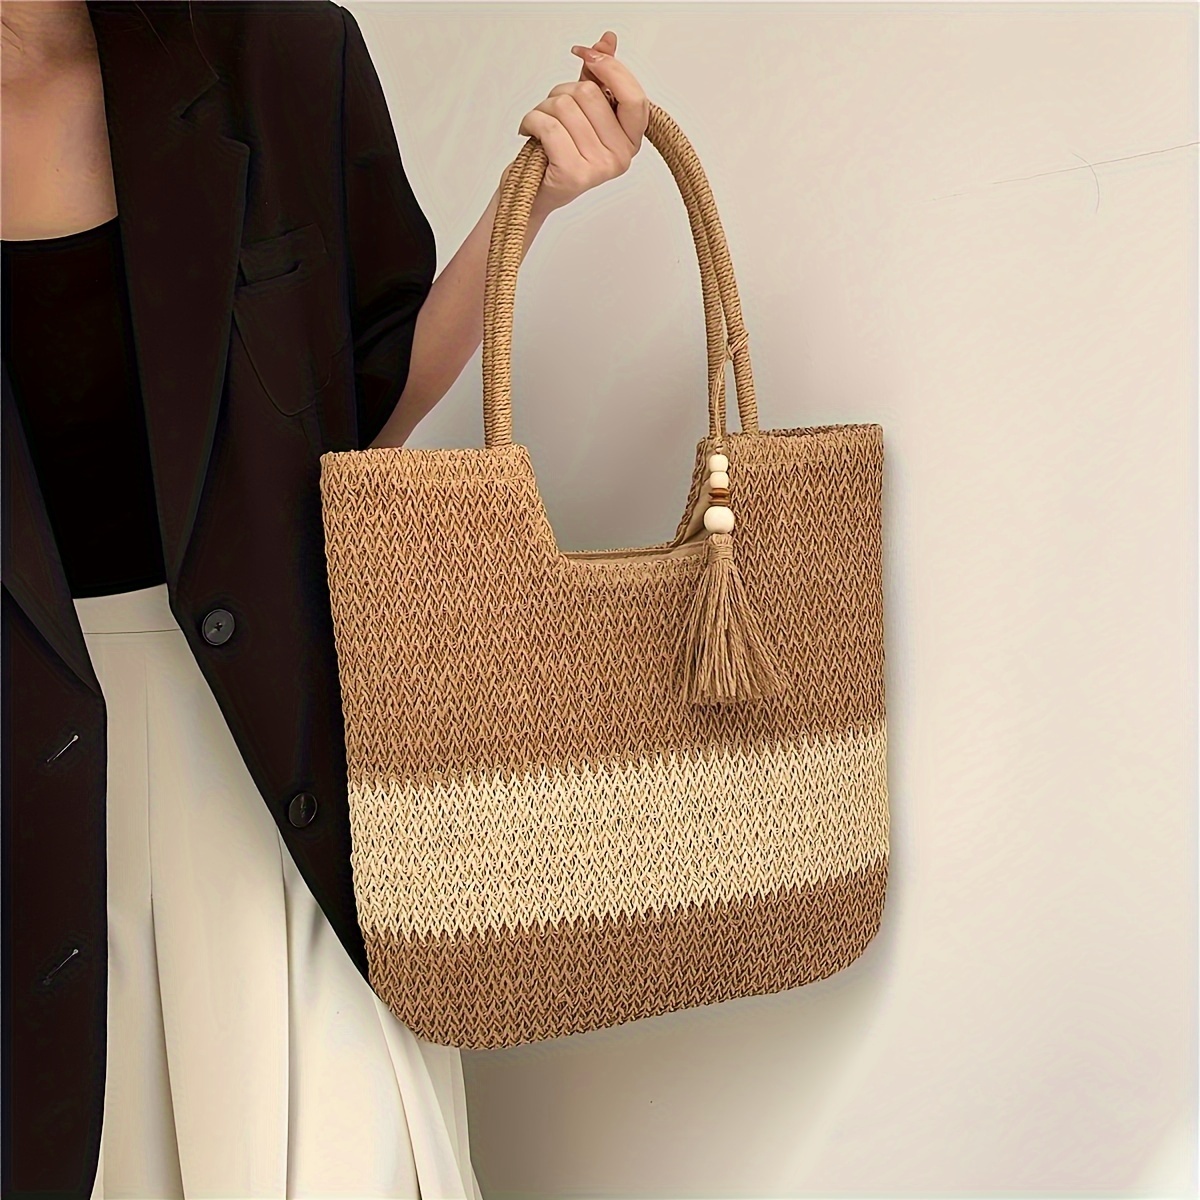 

Women's Summer Straw Tote Bag, Two-tone Design With Tassel Charm, Casual Shoulder Beach Bag